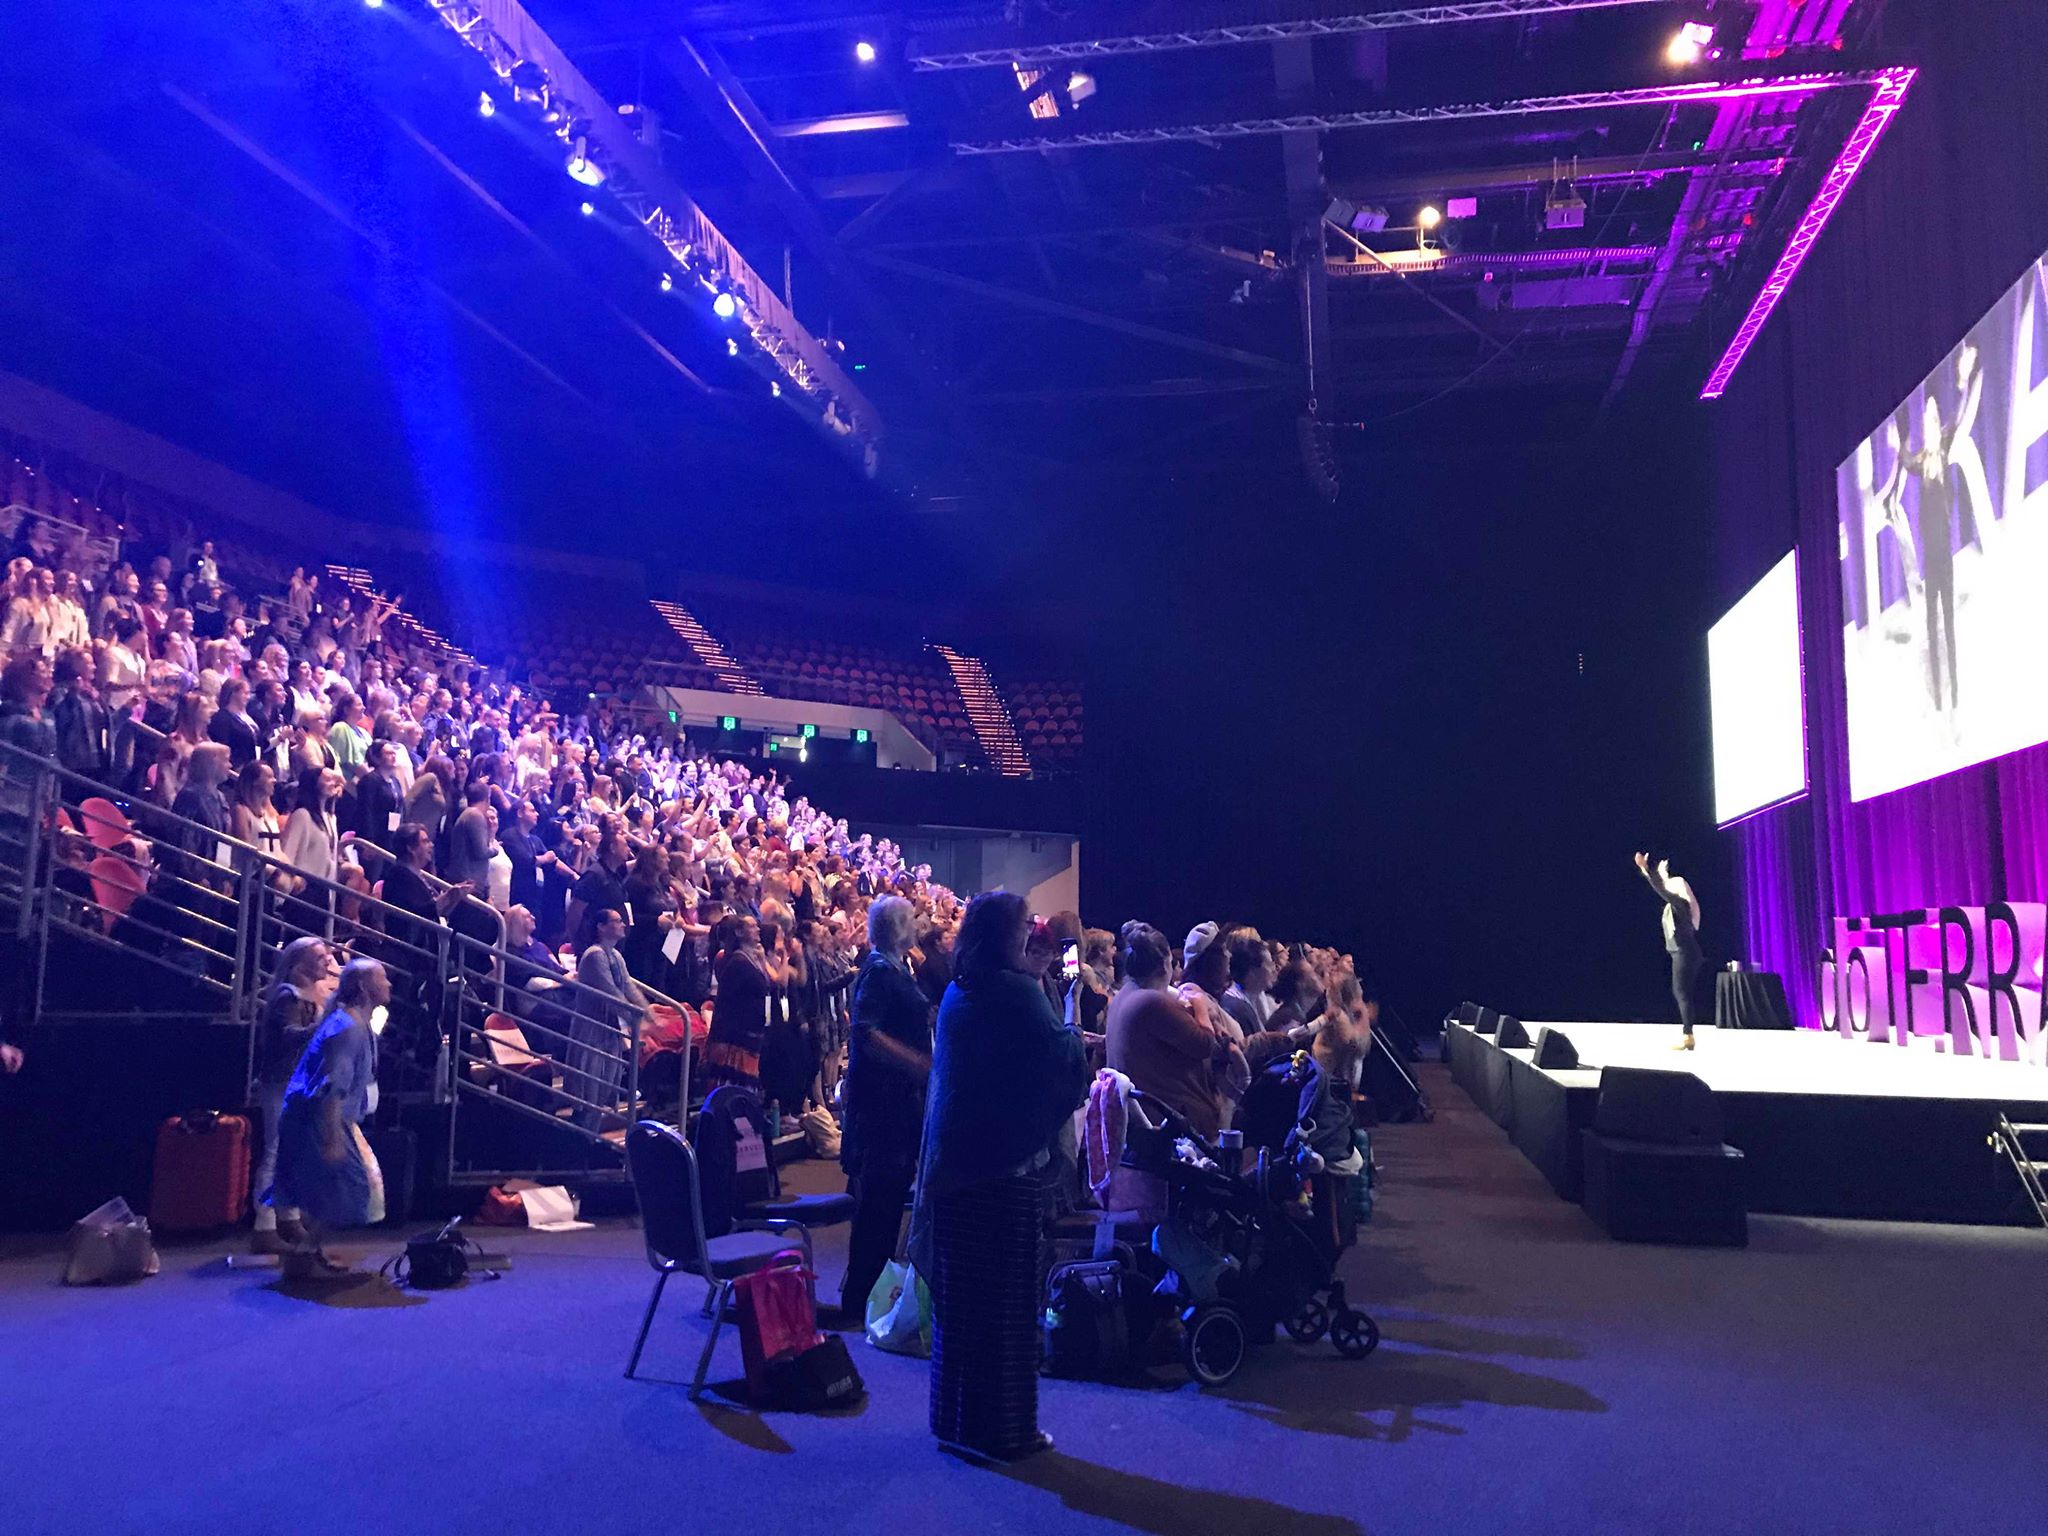 10 Things I learnt from a doTerra Conference about How to Change the